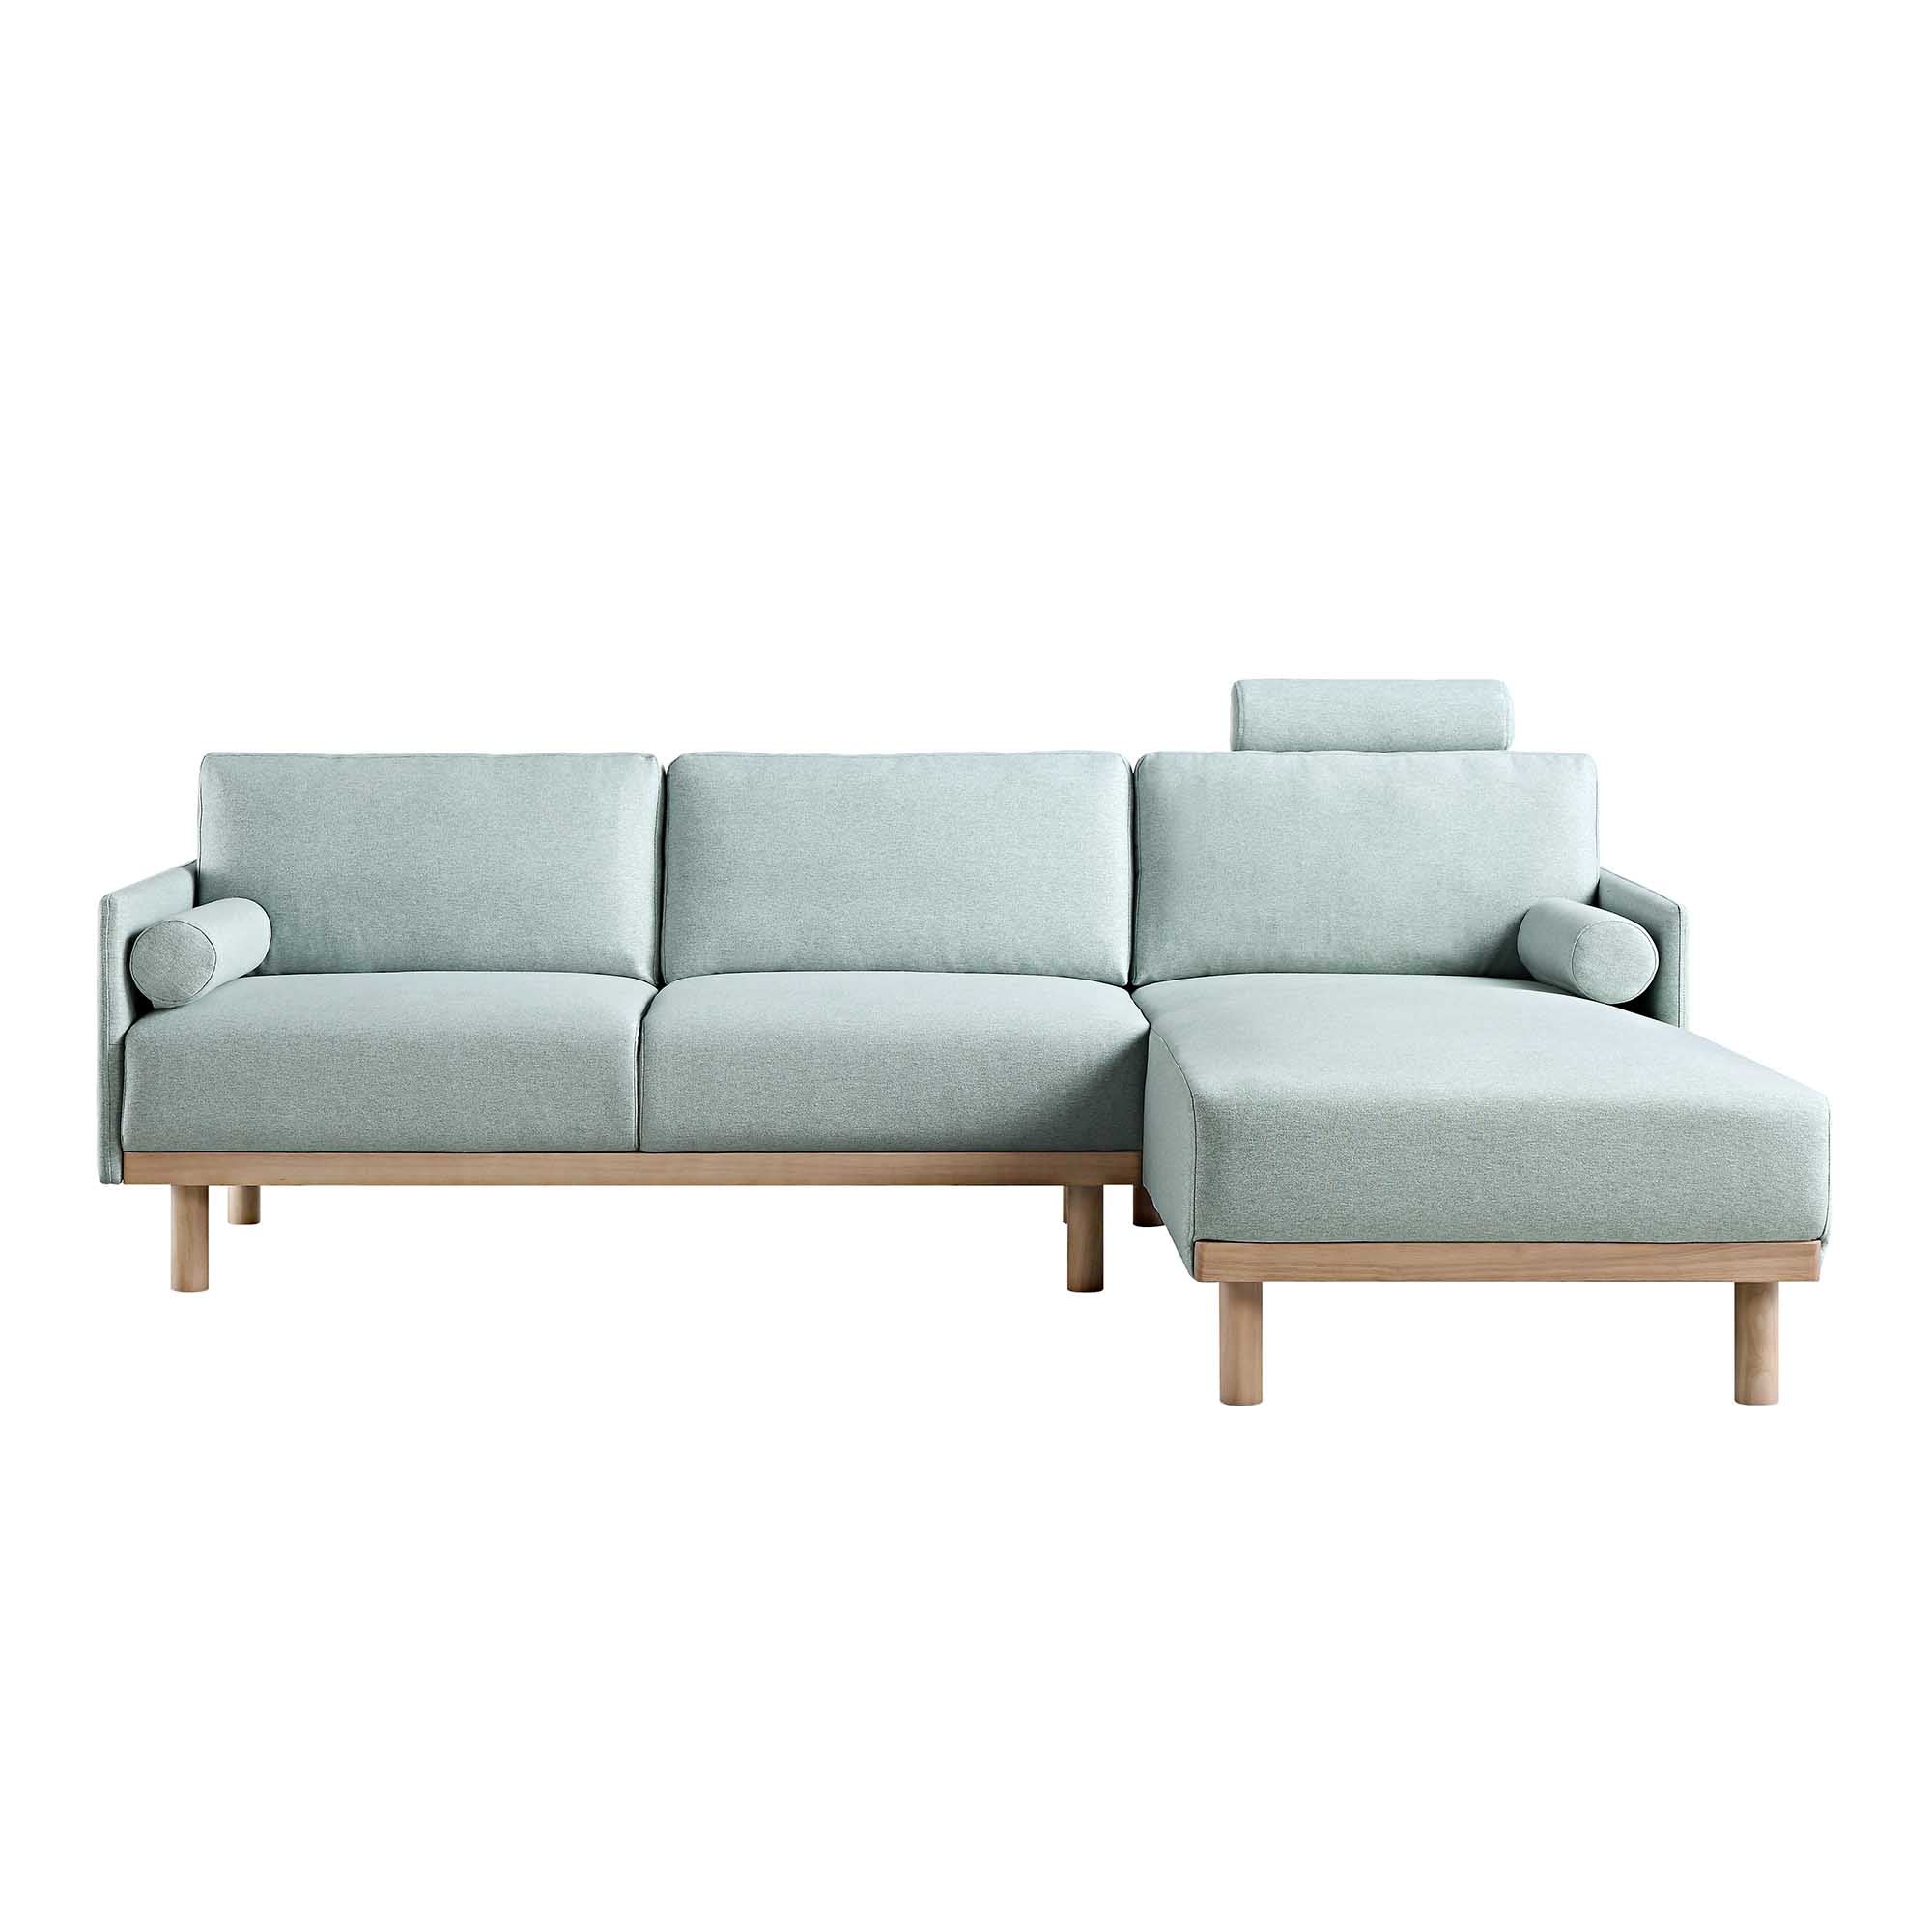 Timber Sage Green Fabric Sofa, Large 3-Seater Chaise Sofa Right Hand